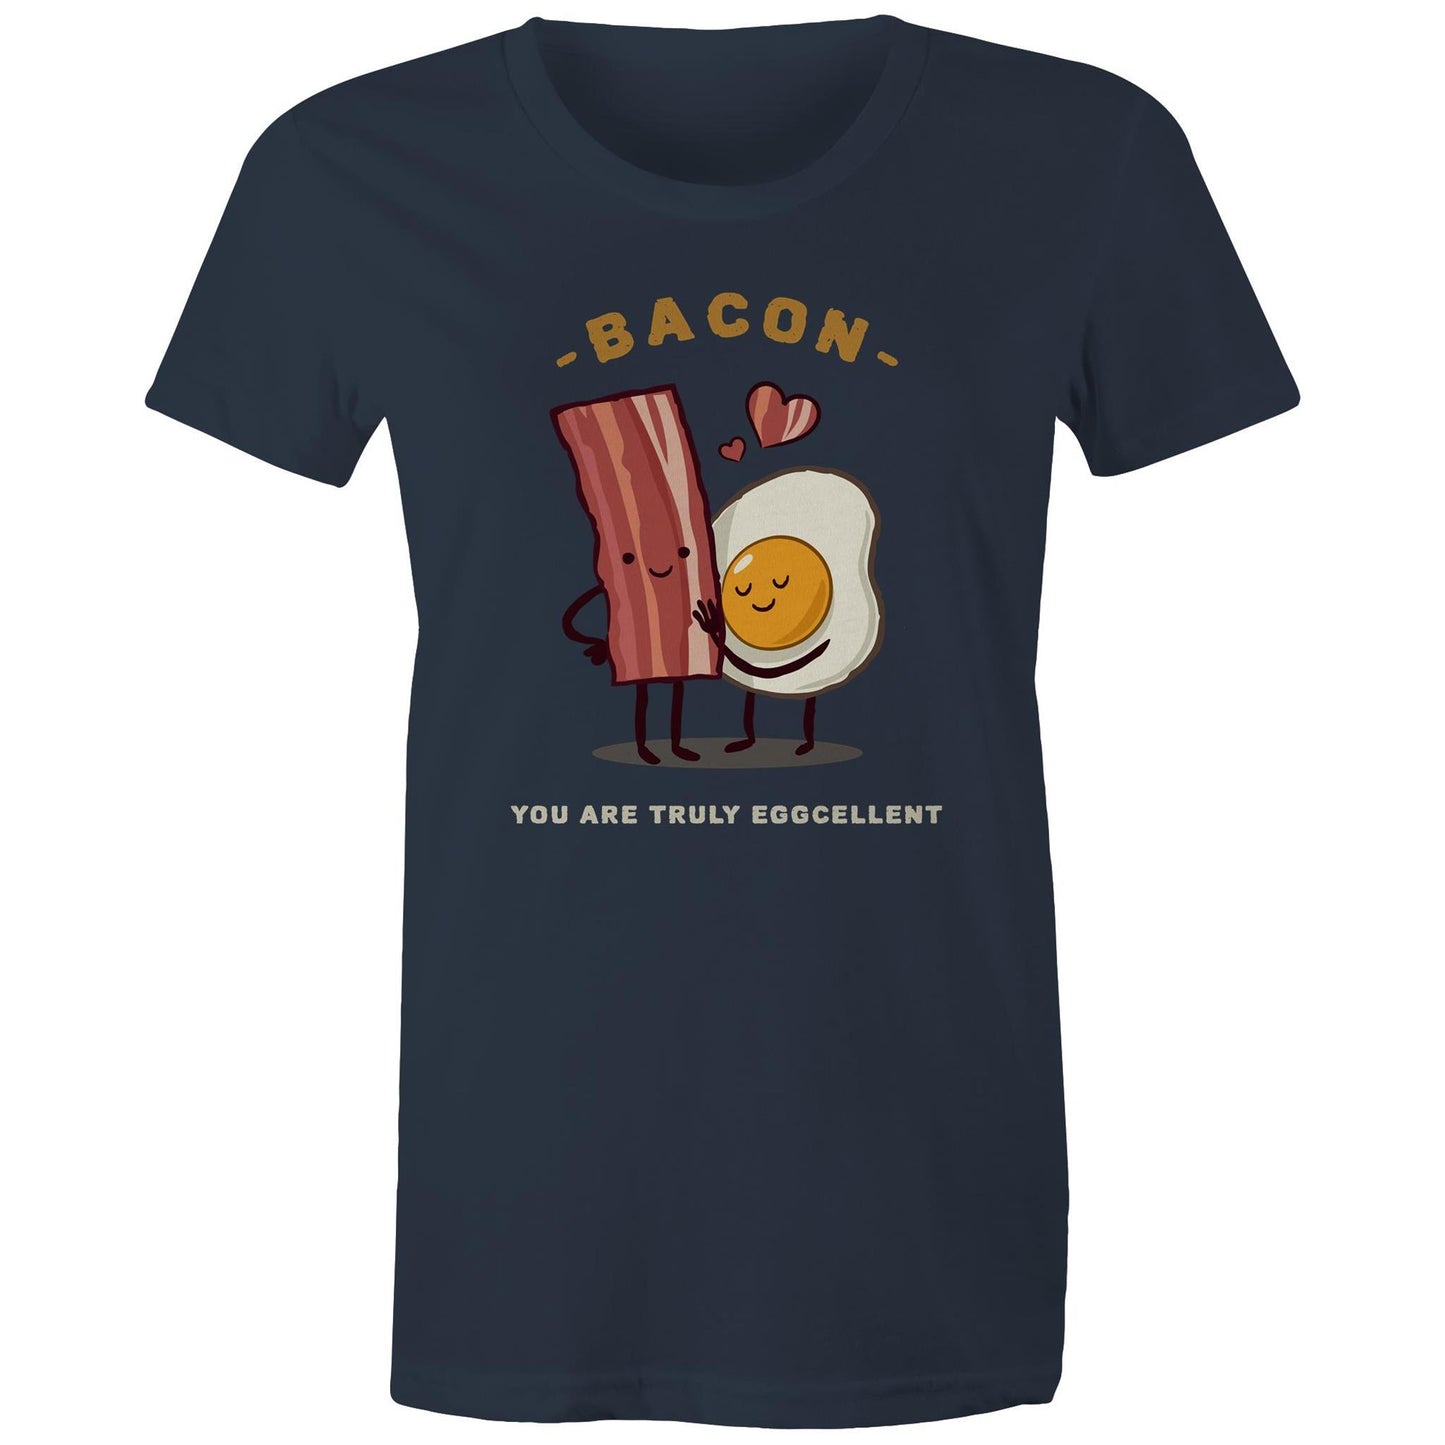 Bacon, You Are Truly Eggcellent - Womens T-shirt Navy Womens T-shirt Food